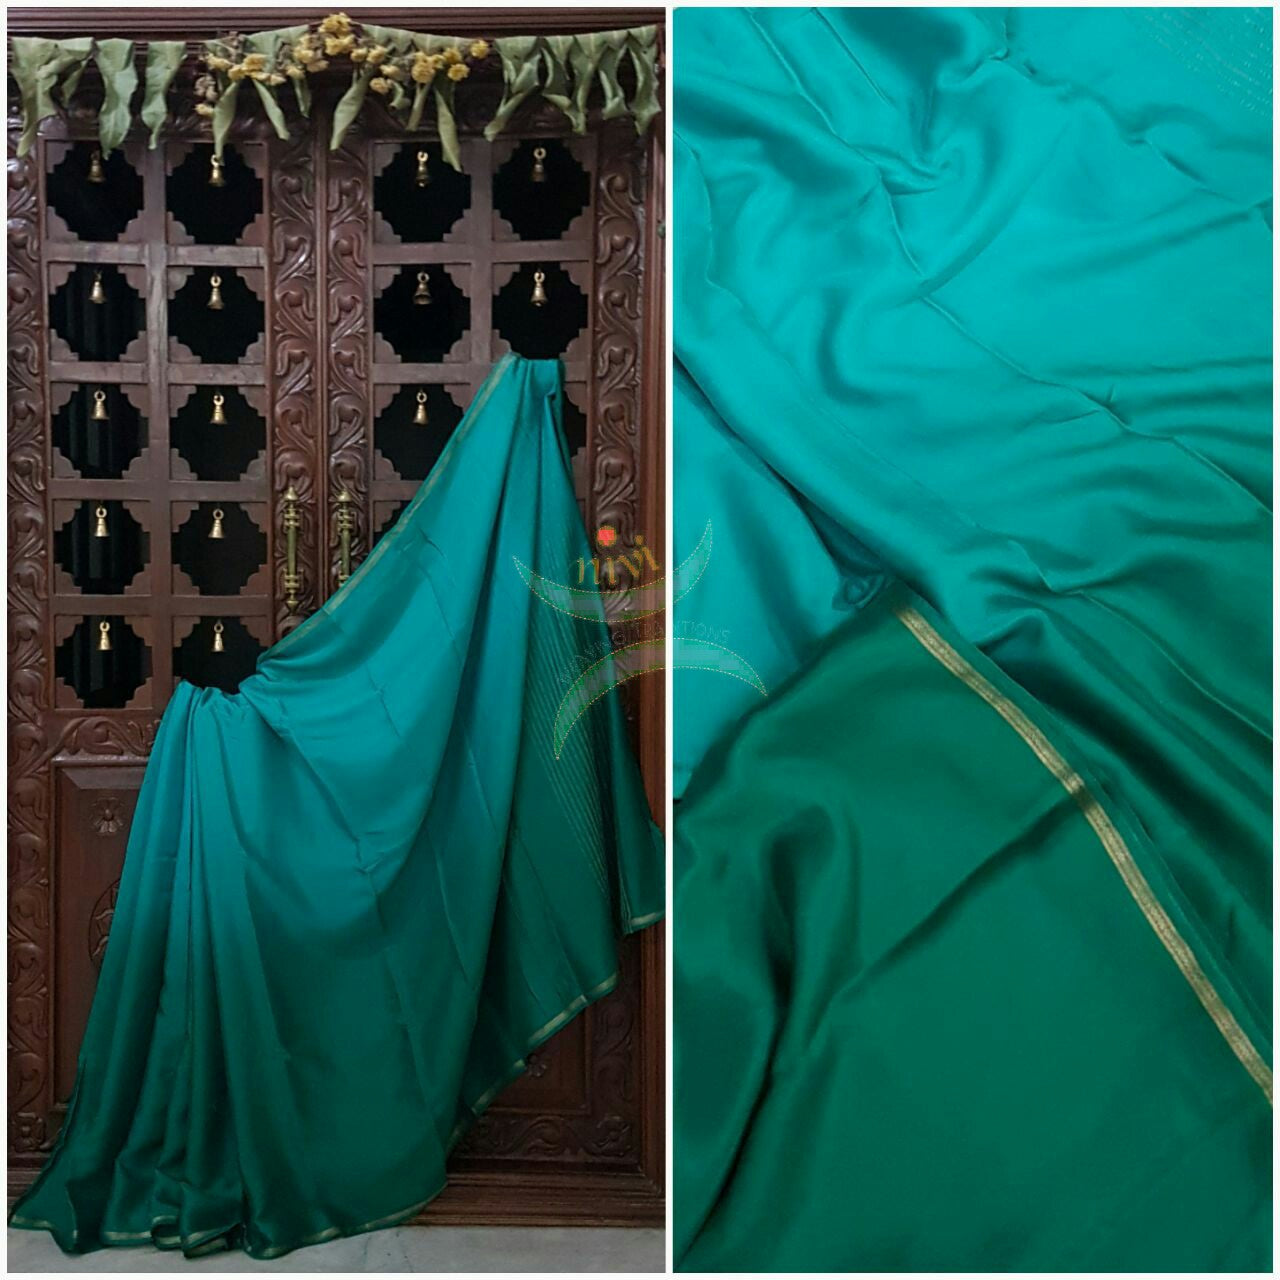 40 gms Two Tone pure Silk Crepe in shades of blue green with a fine zari border. Saree comes with pure Green crepe blouse.